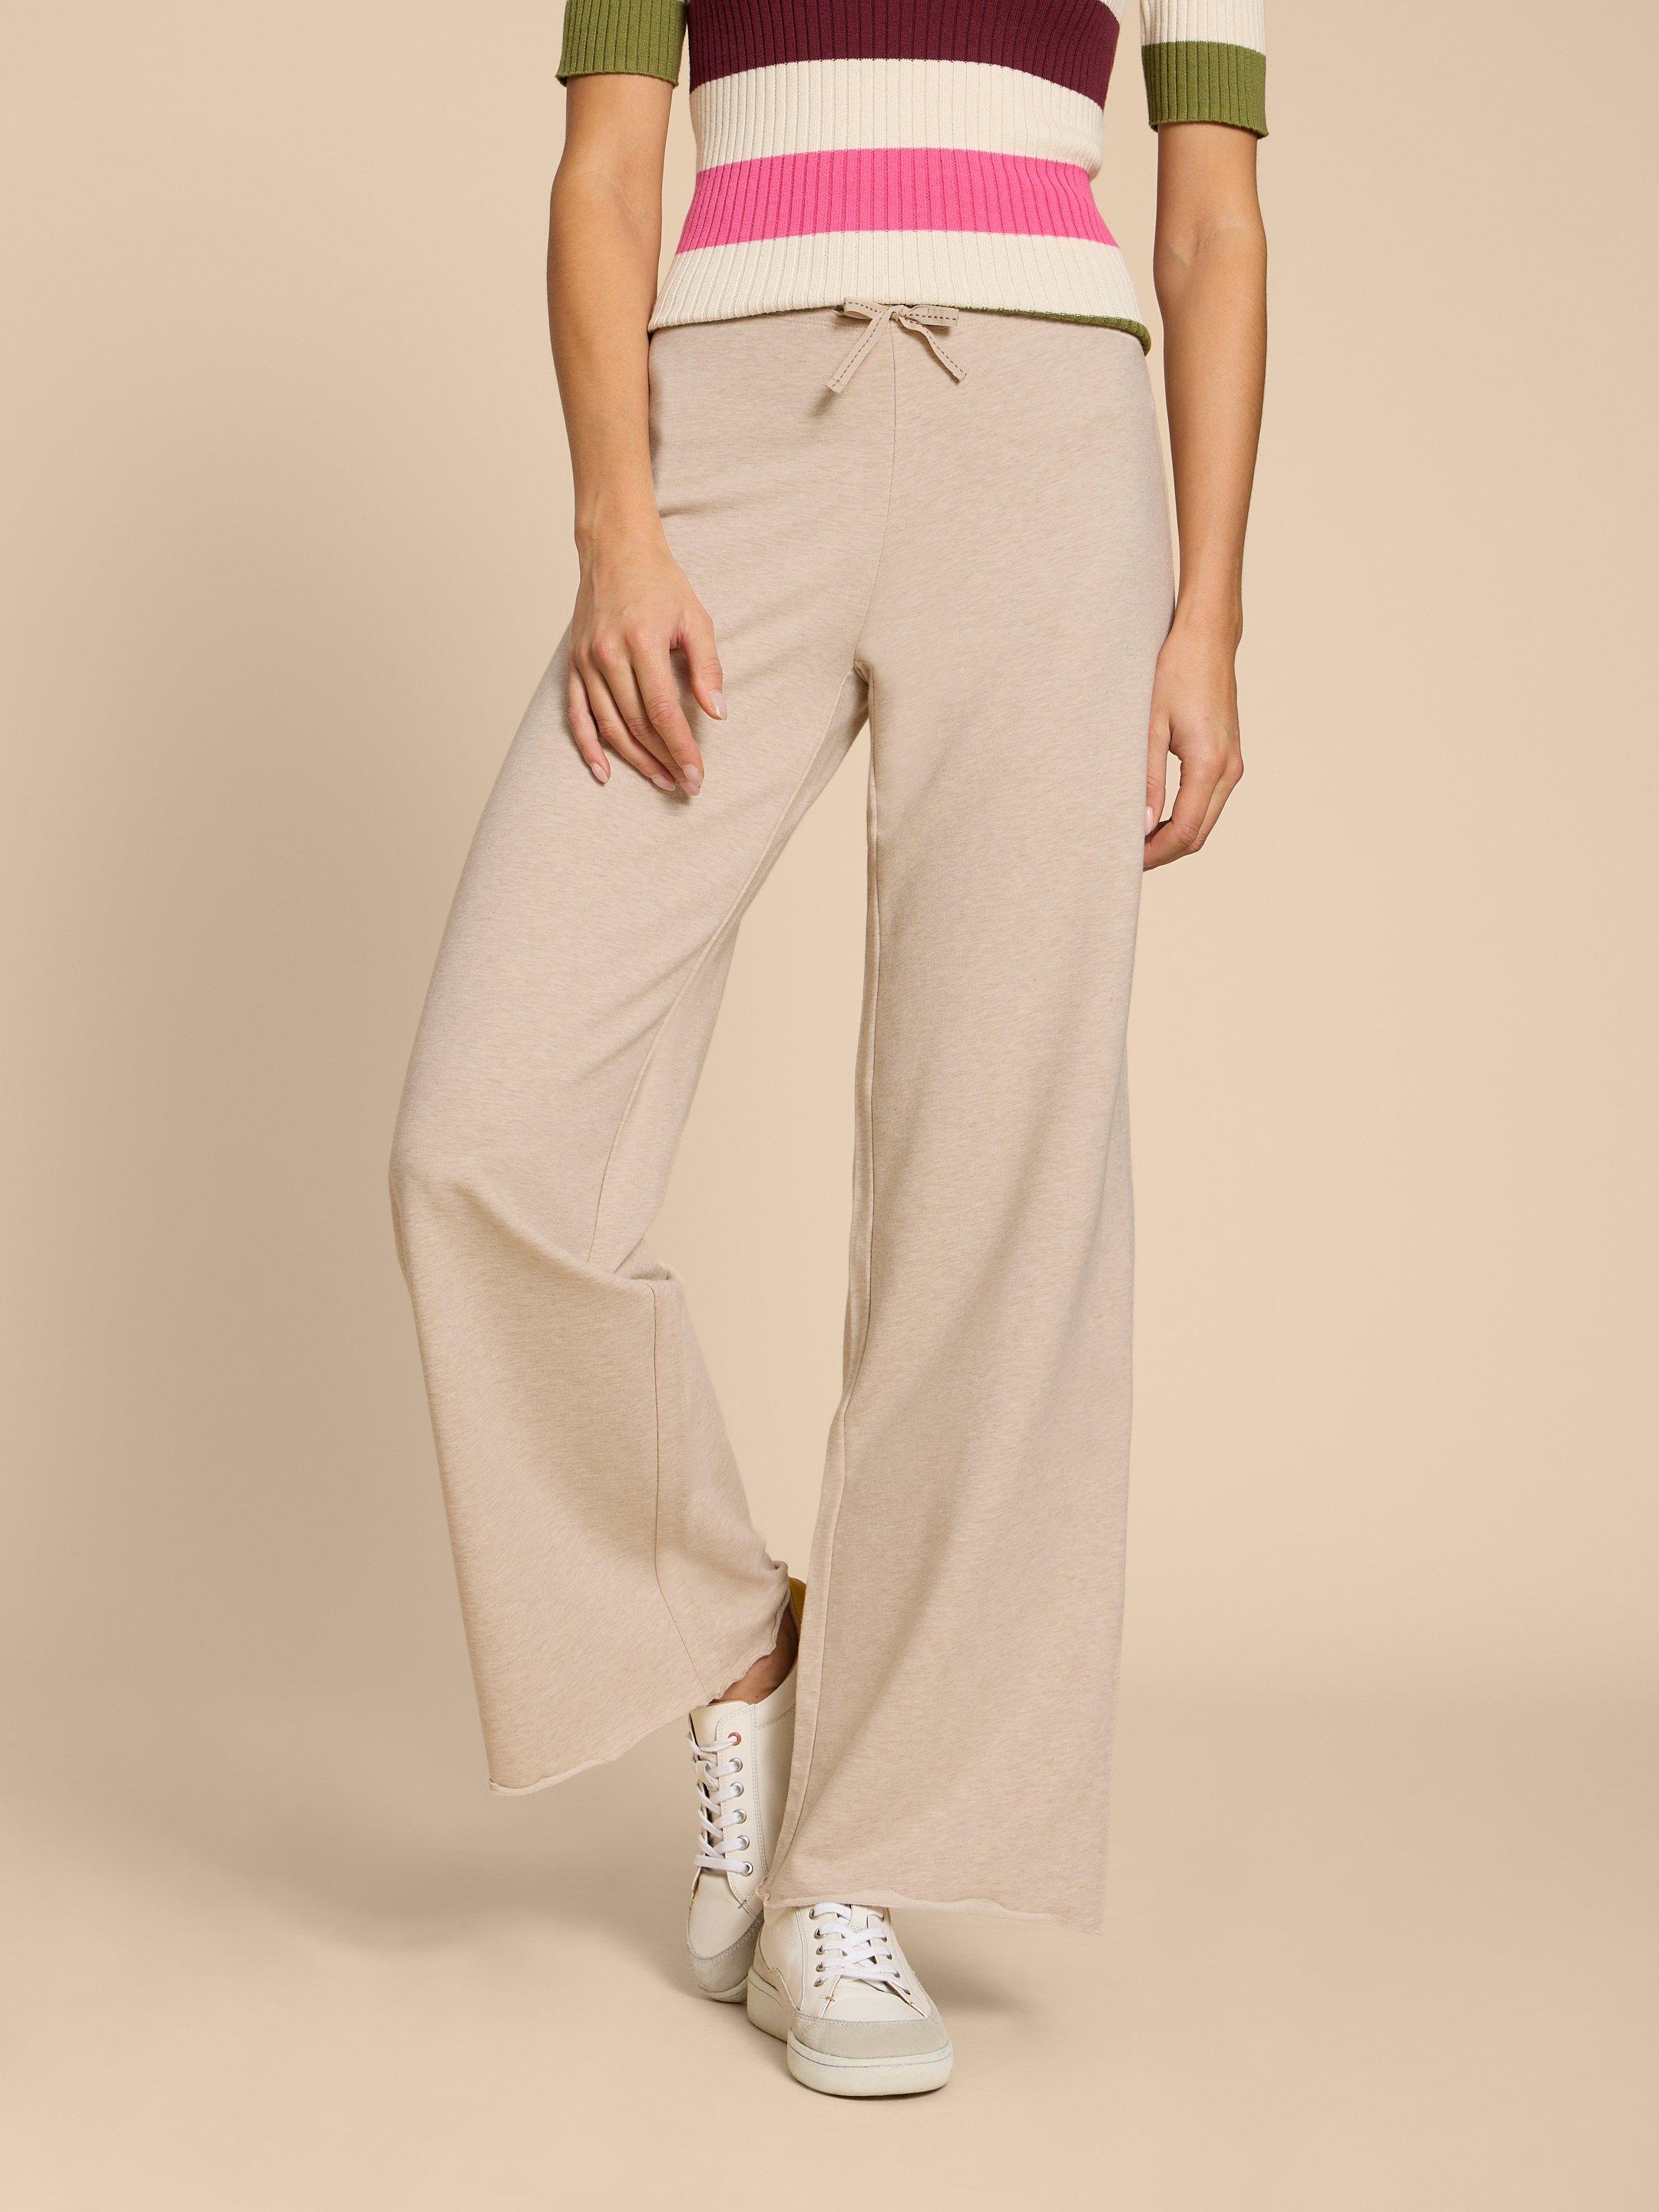 Dolce Organic Pant in LGT NAT - MODEL FRONT